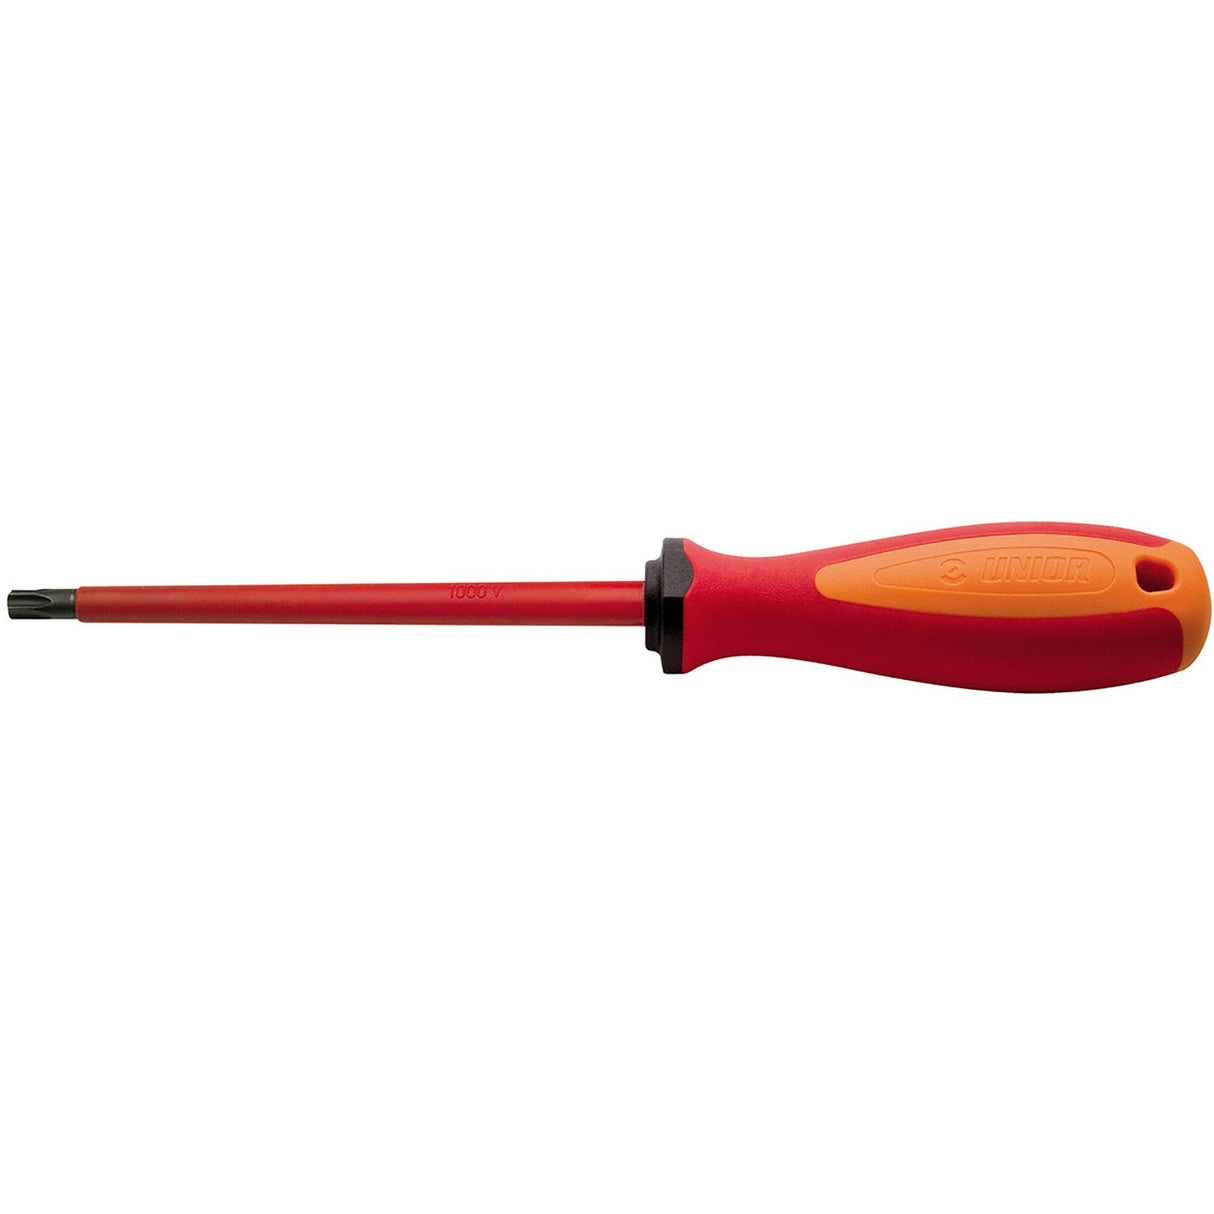 Unior Screwdriver Vde Tbi With Tx Profile: Red Tx 20